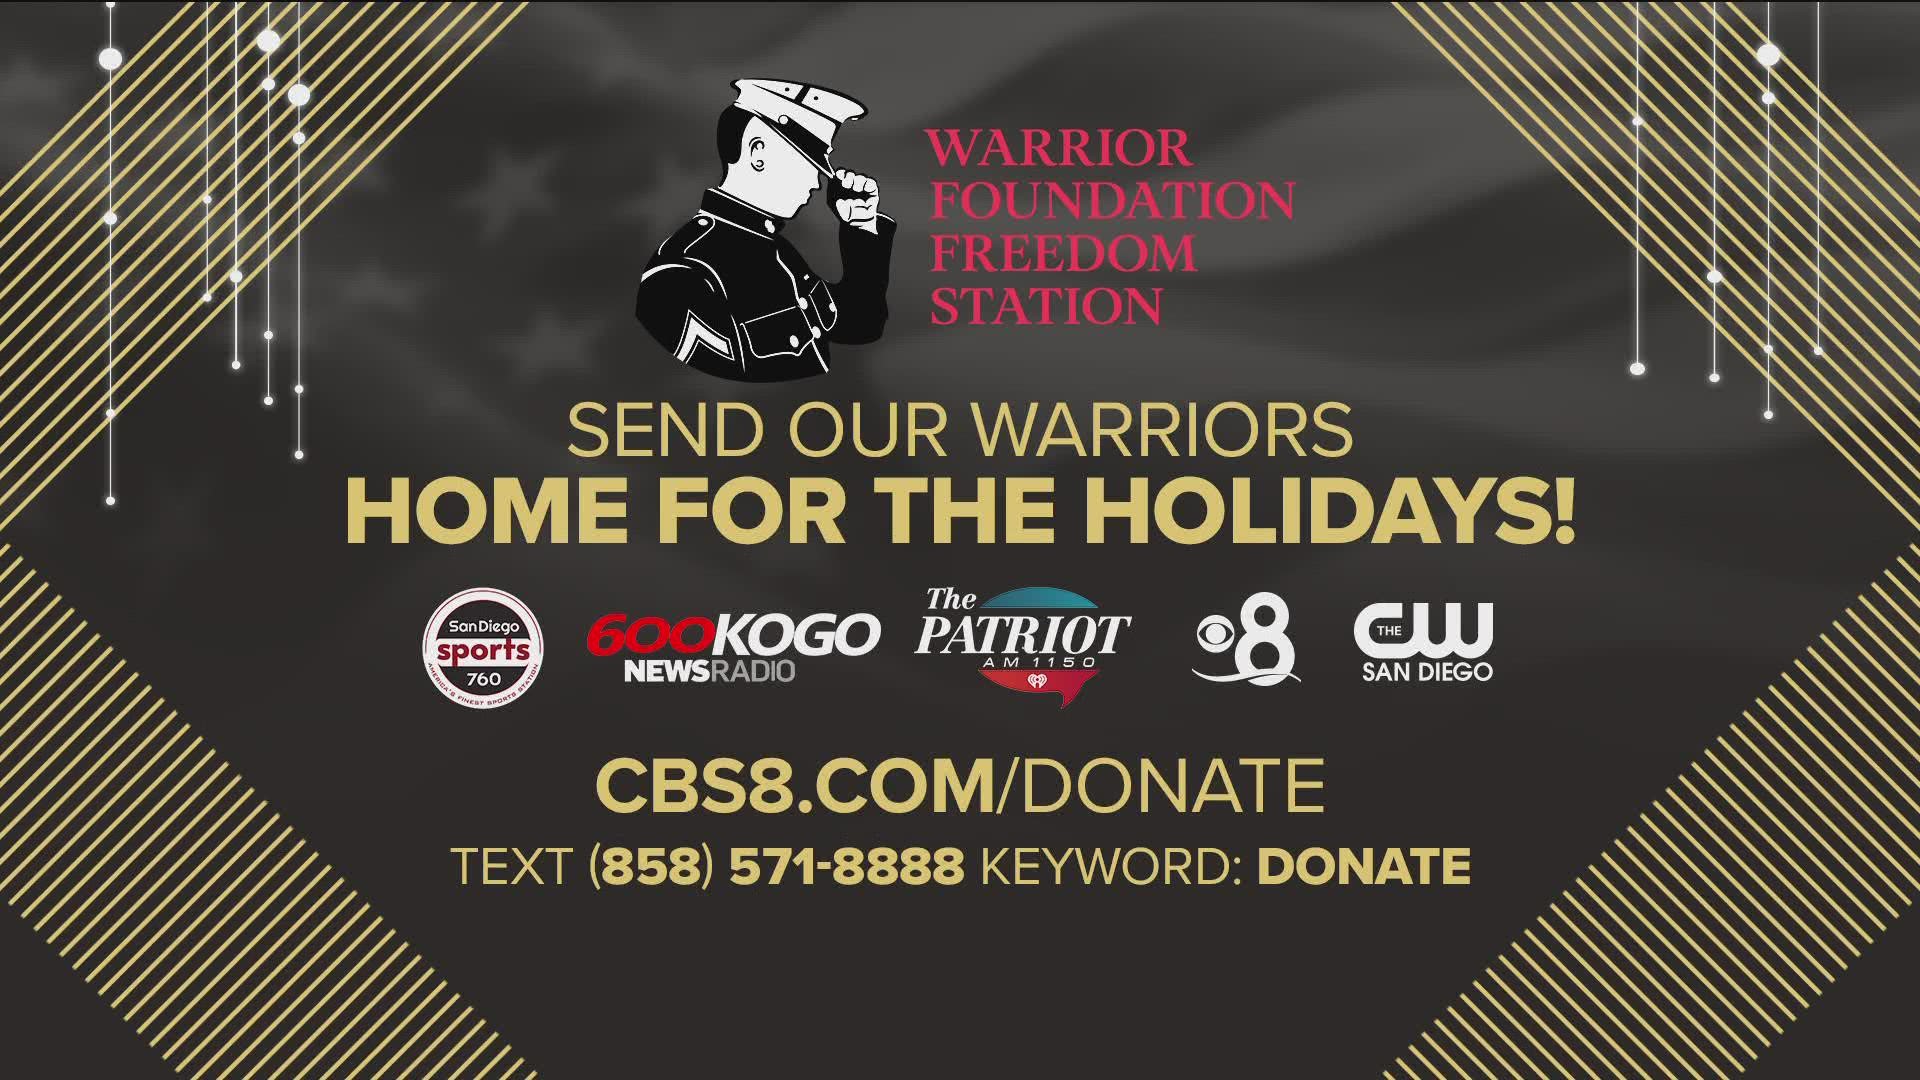 Tis’ the season for giving, and with your help, we can make wishes come true for our nation’s heroes this holiday season.